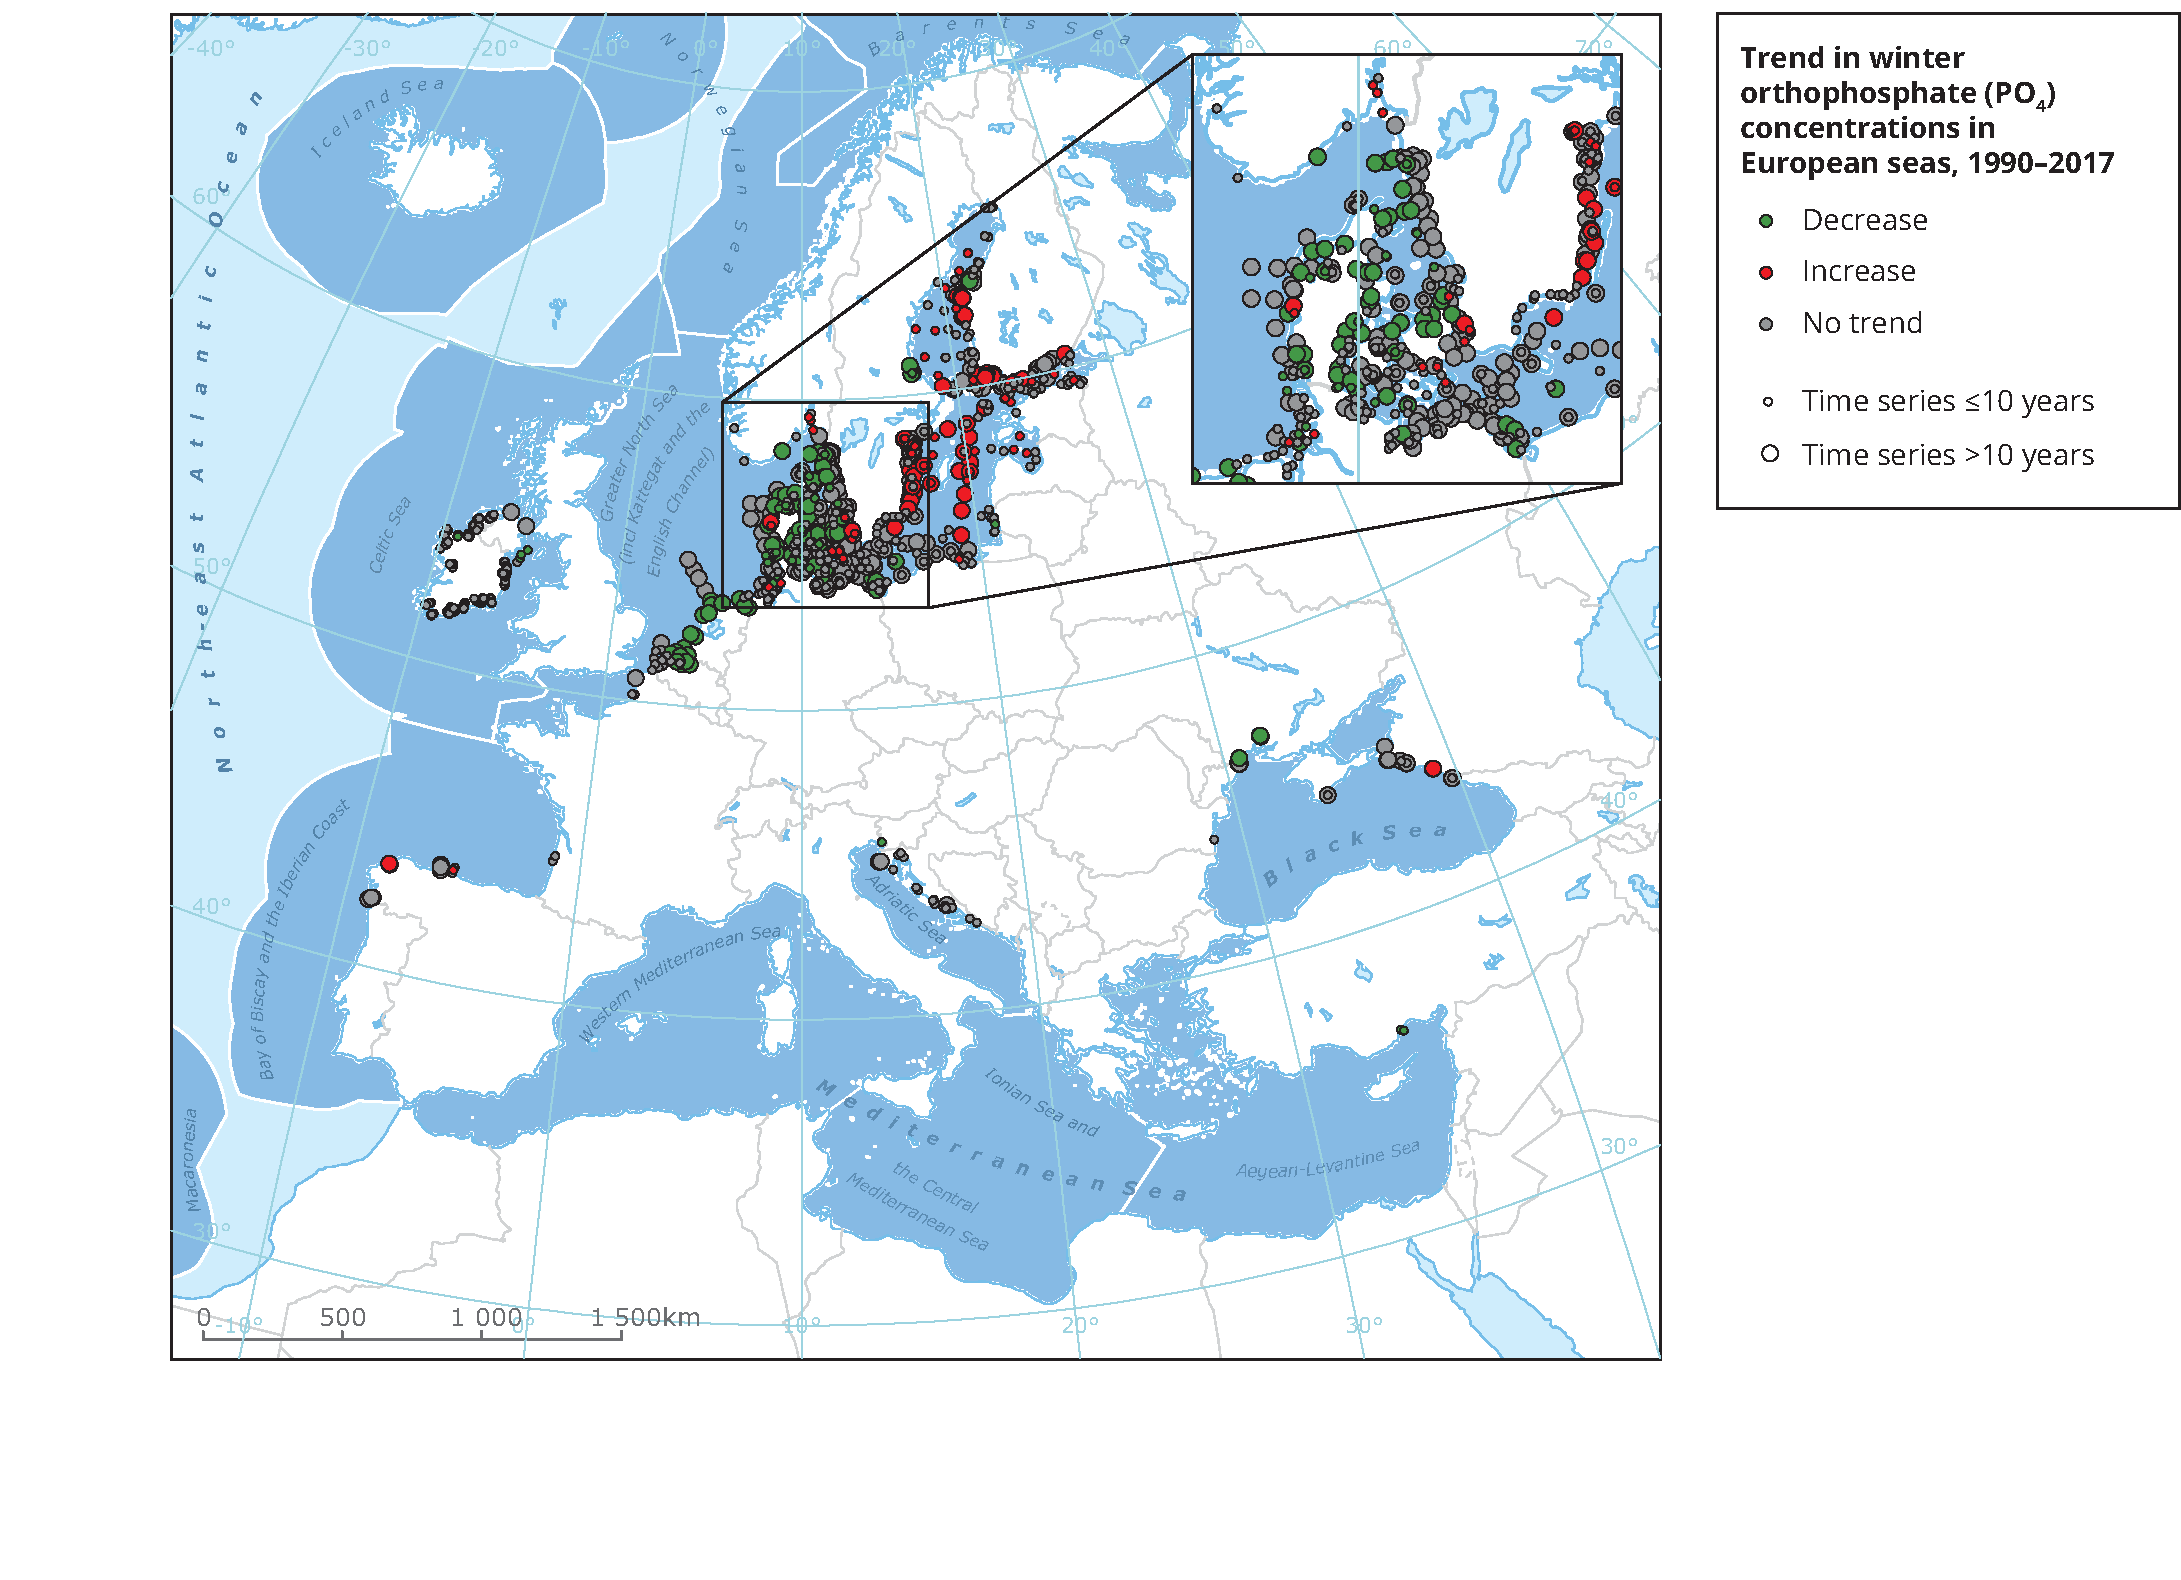 Trends in winter mean orthophosphate concentrations in European seas